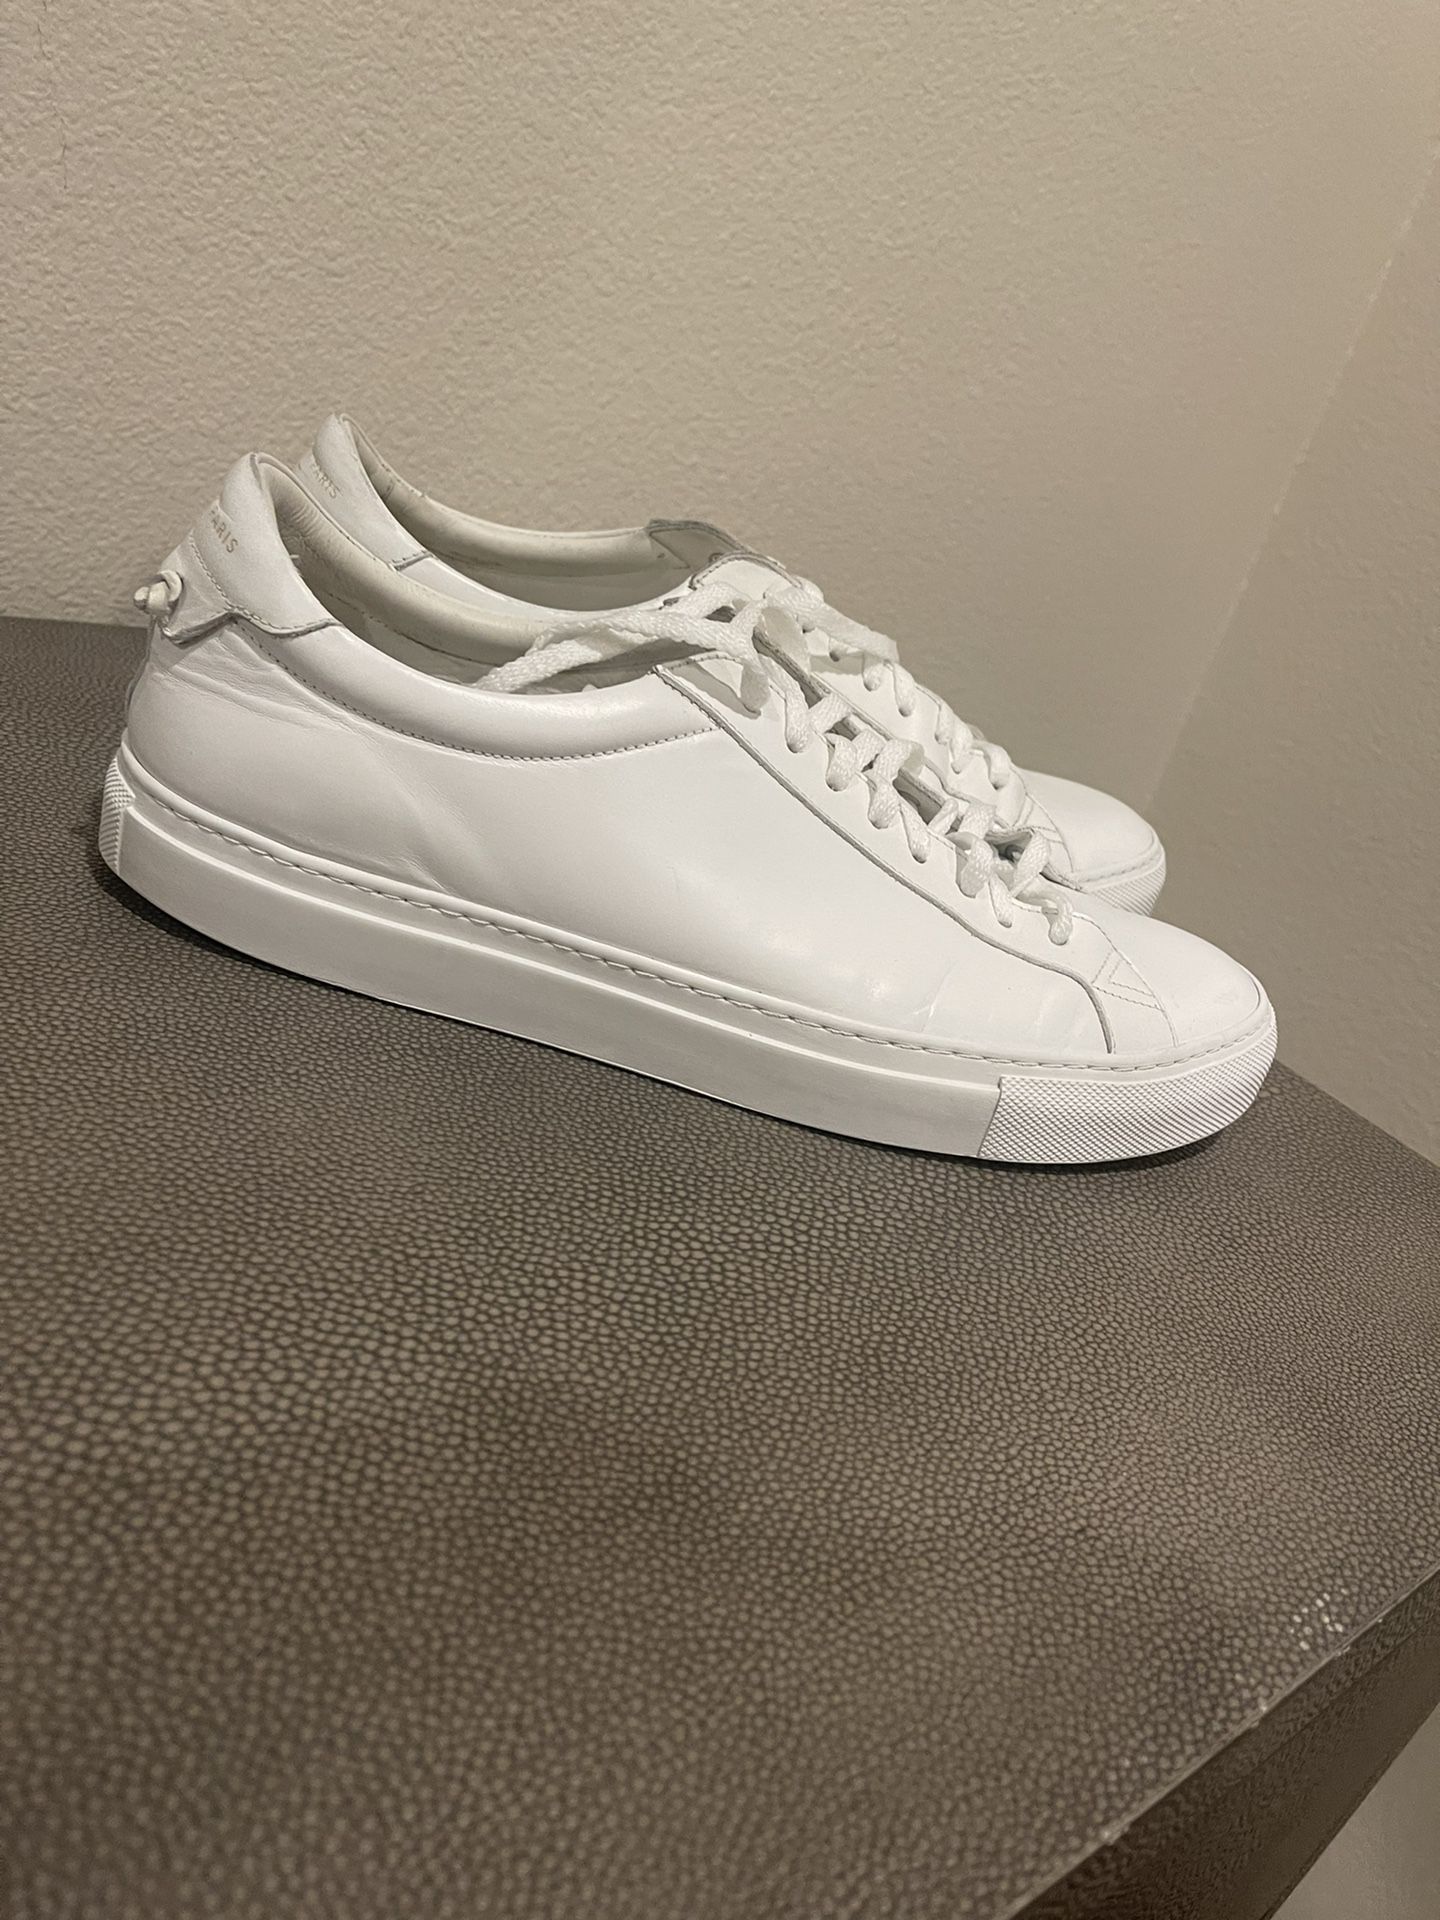 Givenchy Sneakers for Sale in El CA OfferUp